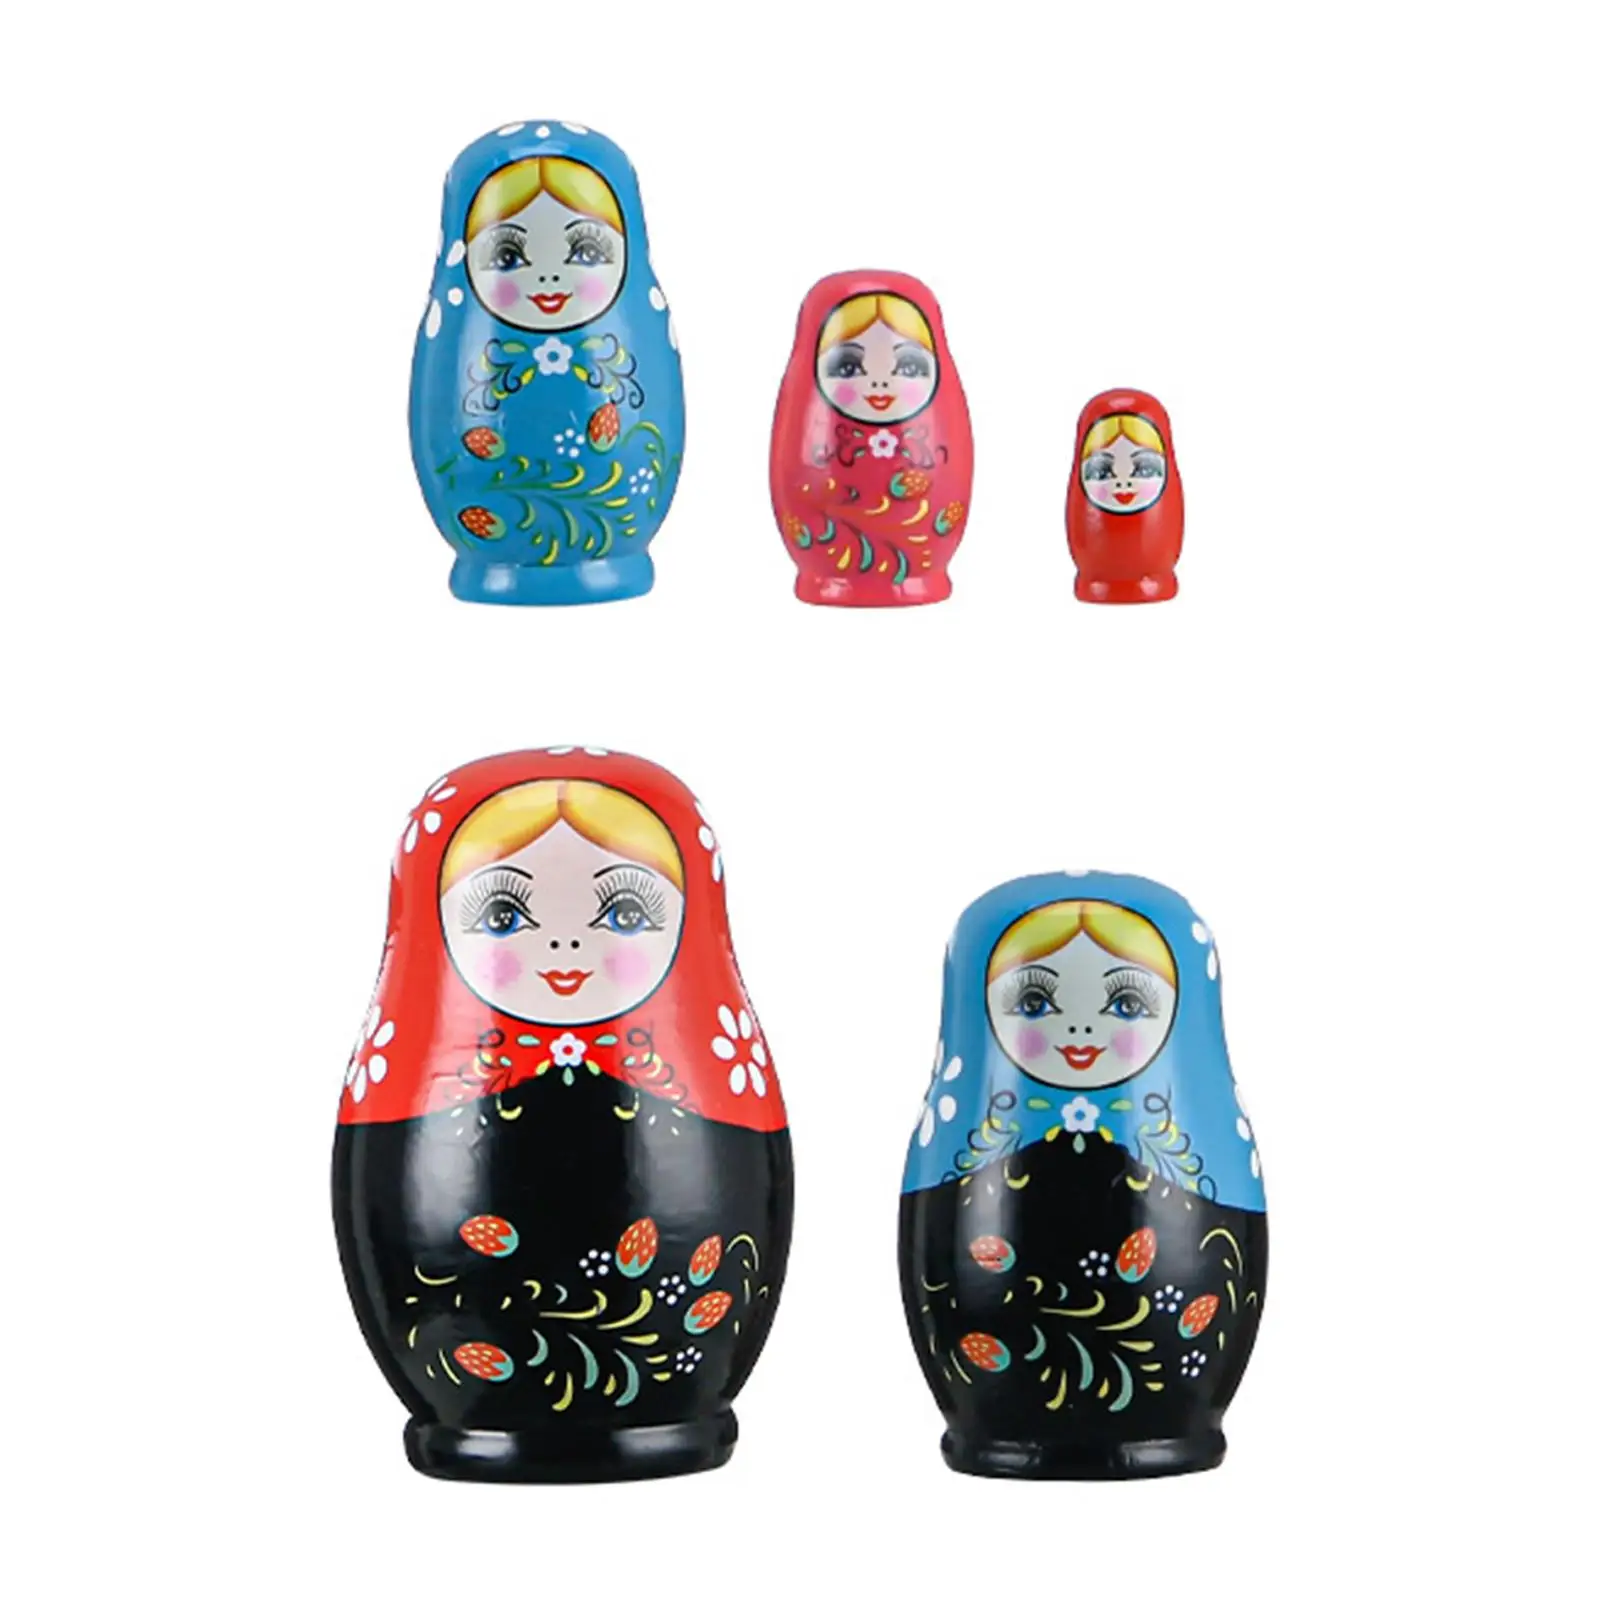 5x Handmade Russian Nesting Dolls Wood Crafts Stacking Toys for Children Toddler Girls Birthday Gifts Home Decor